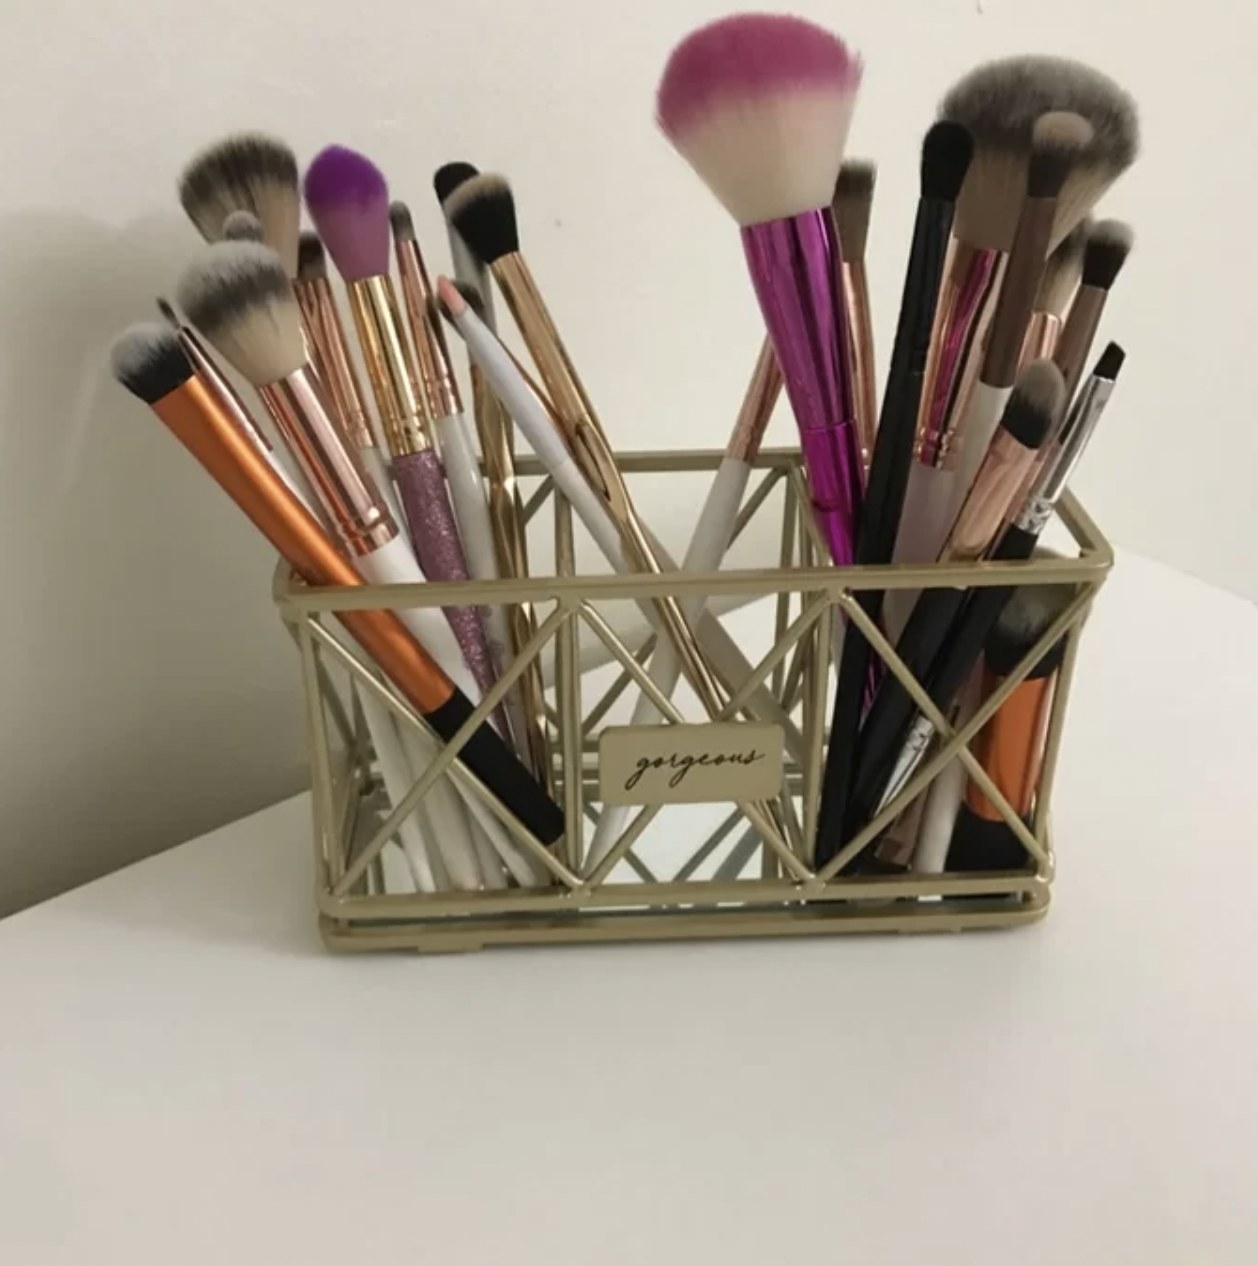 Reviewer&#x27;s photo of the gold-finished geometric organizer holding their makeup brushes